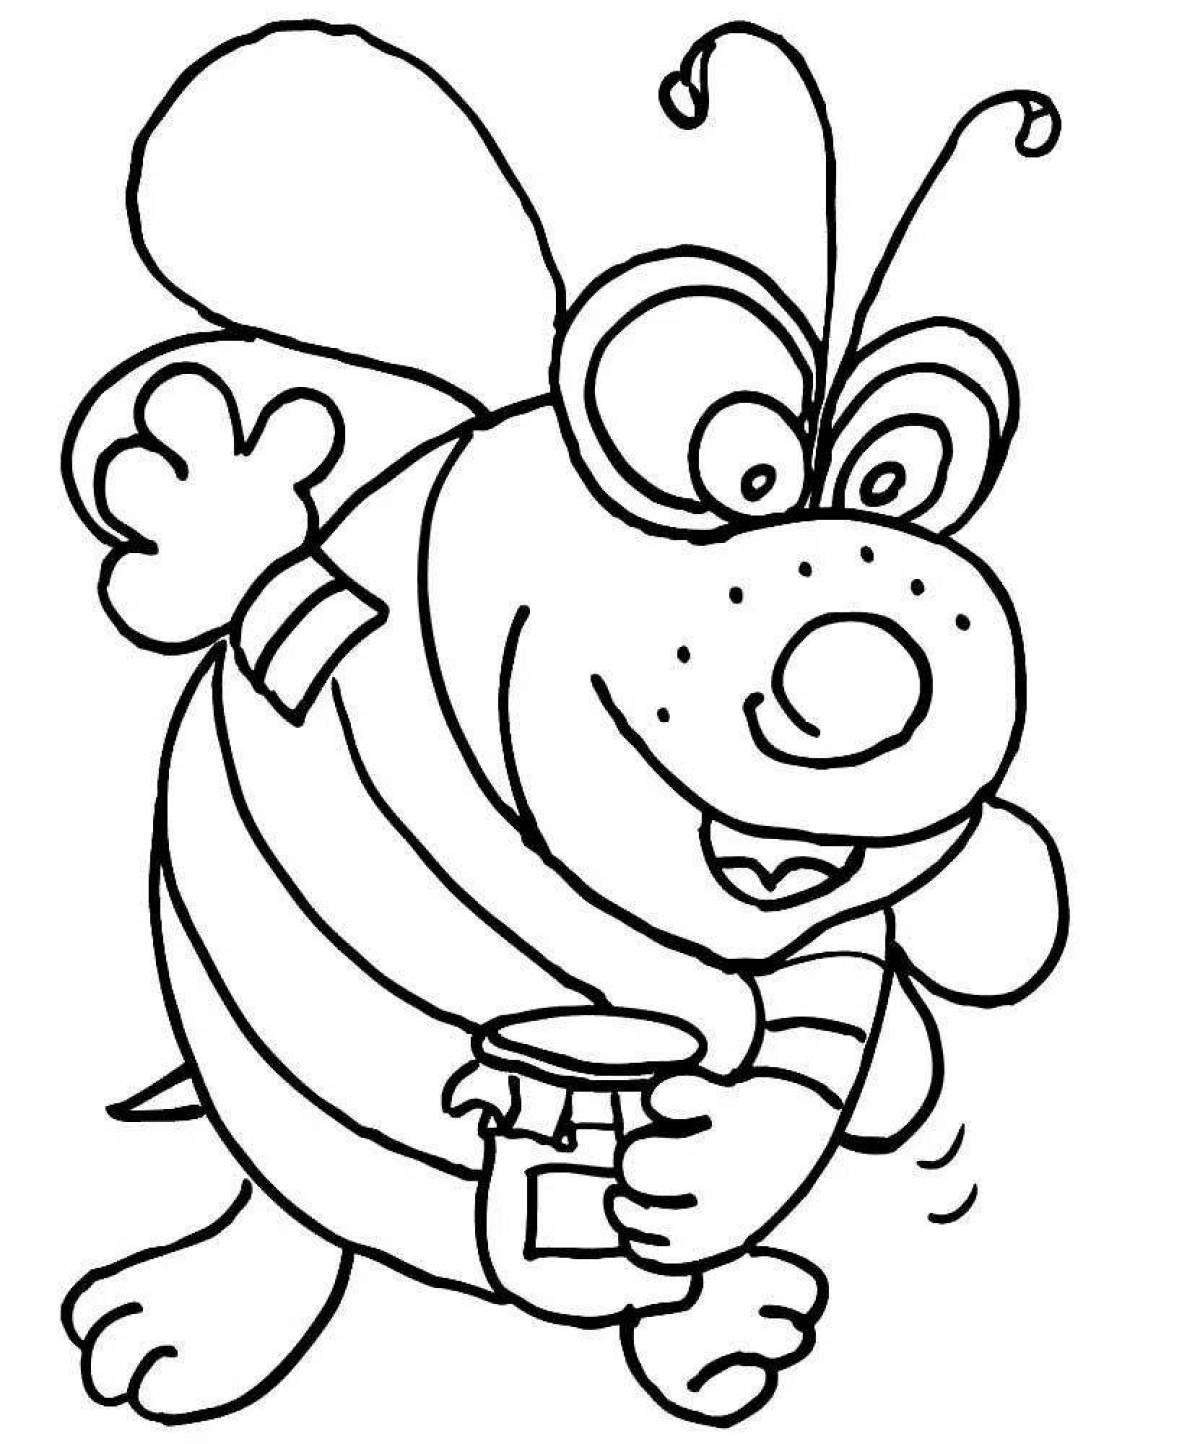 Fabulous shemale coloring pages for kids